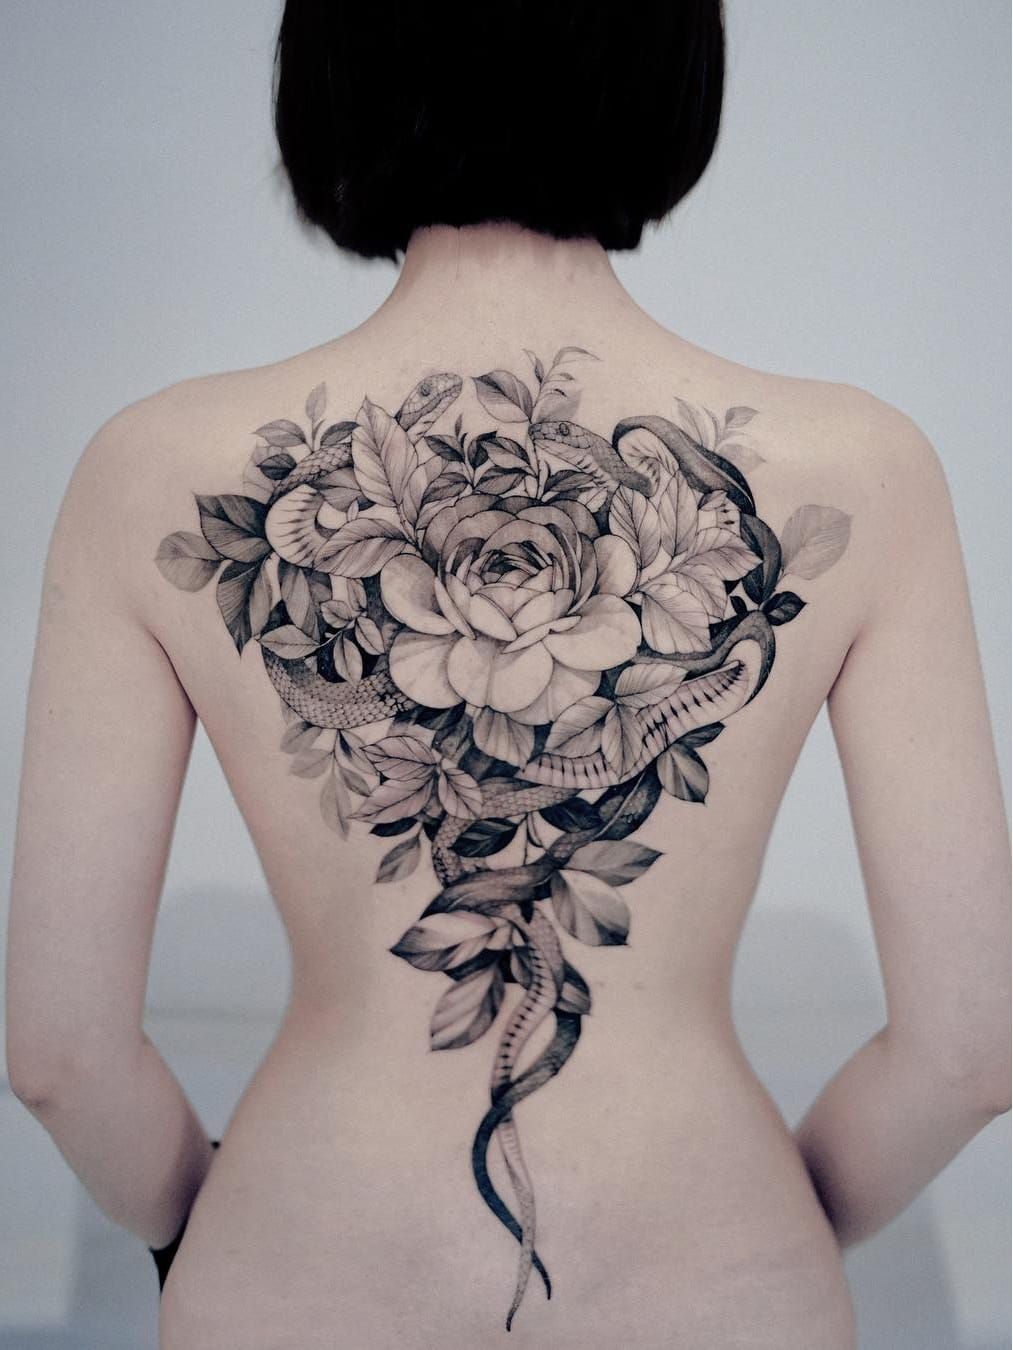 Full Back Tattoo for Women with Flowers | Remington Tattoo Parlor